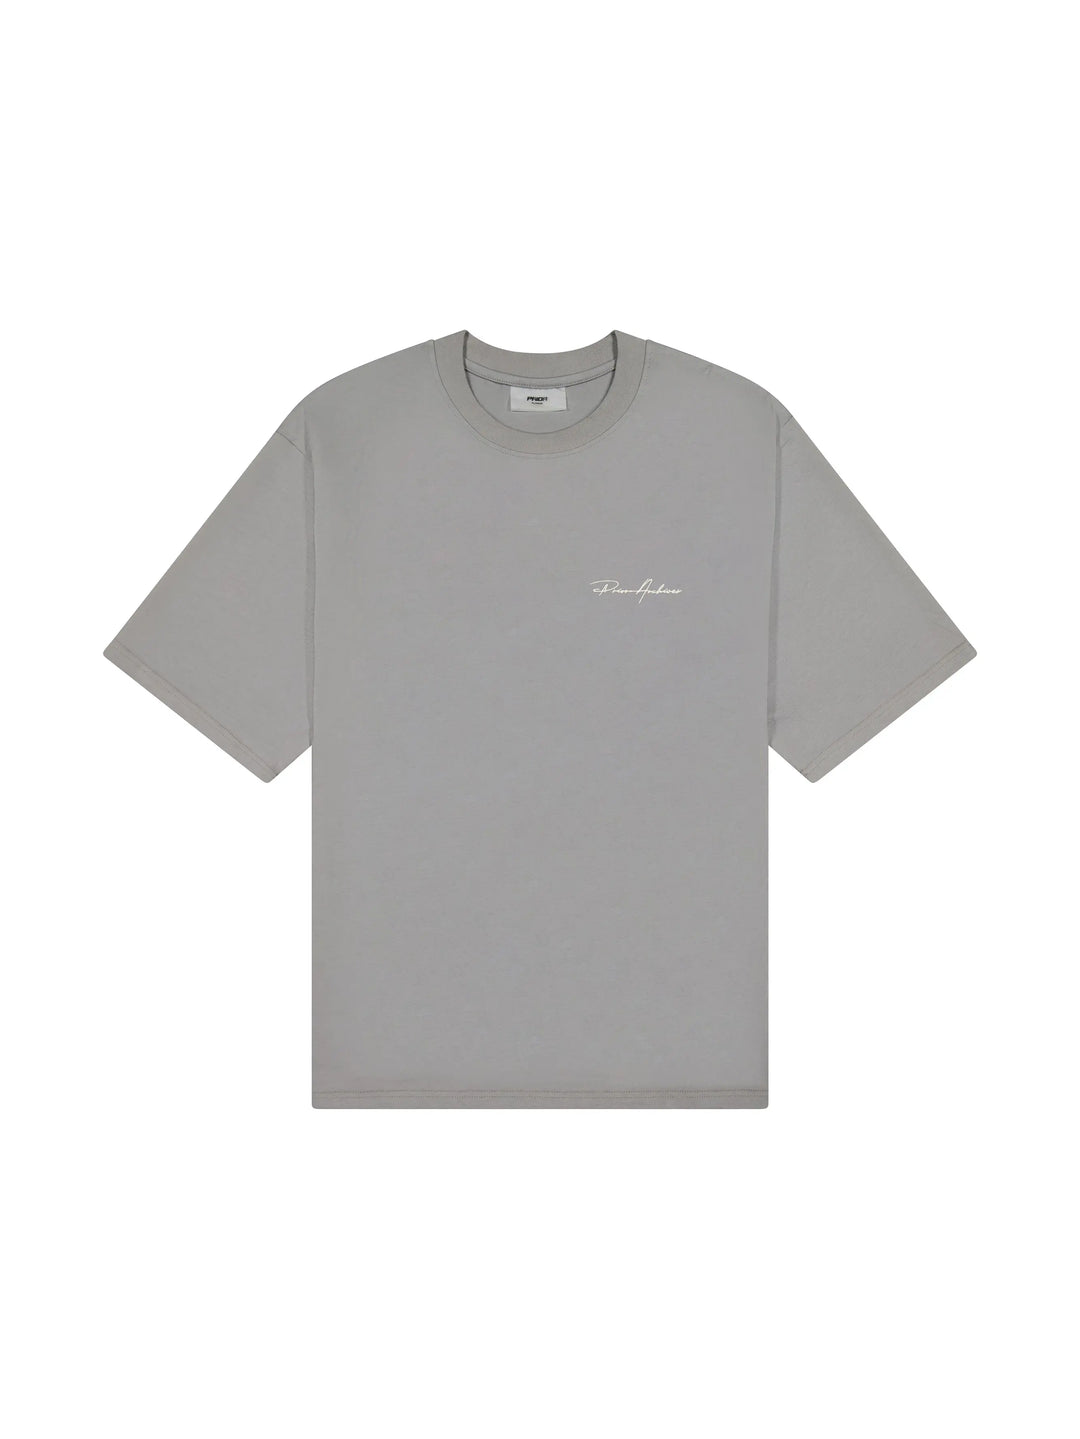 Prior Embroidery Logo Oversized T-shirt Soot in Melbourne, Australia - Prior